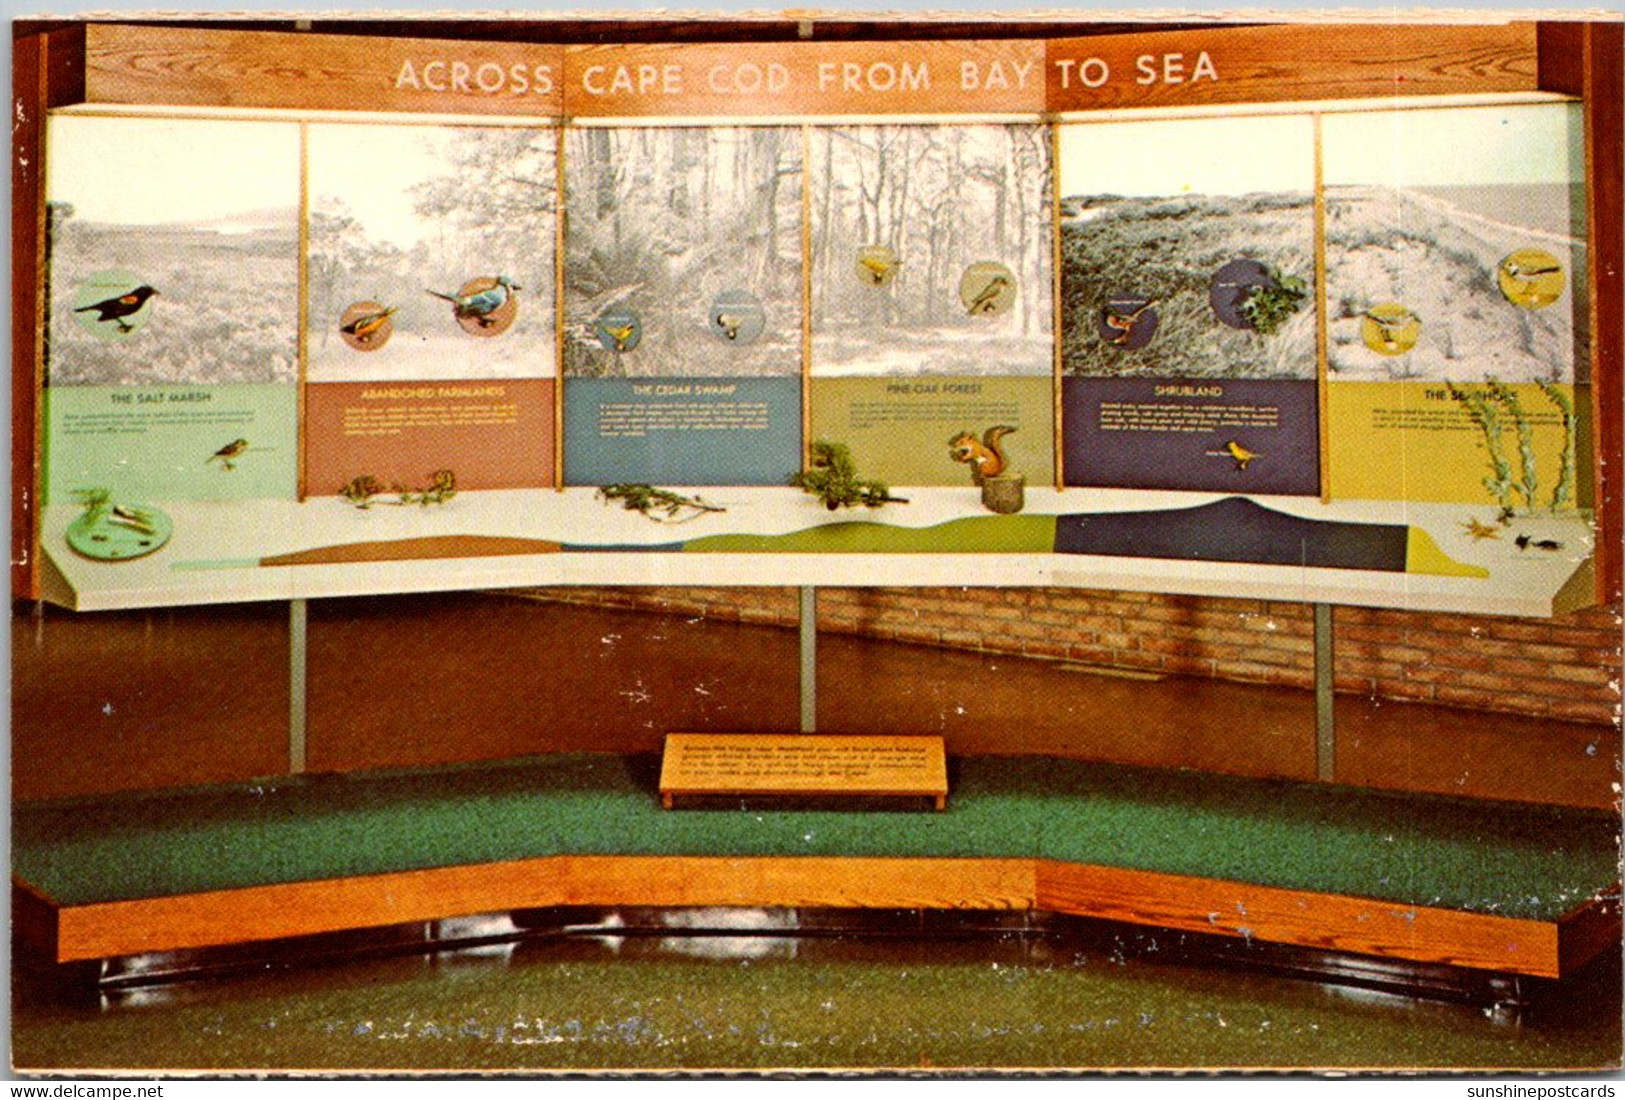 Massachusetts Cape Cod Salt Pond Visitor Center Display Across The Cape From Bay To Sea - Cape Cod